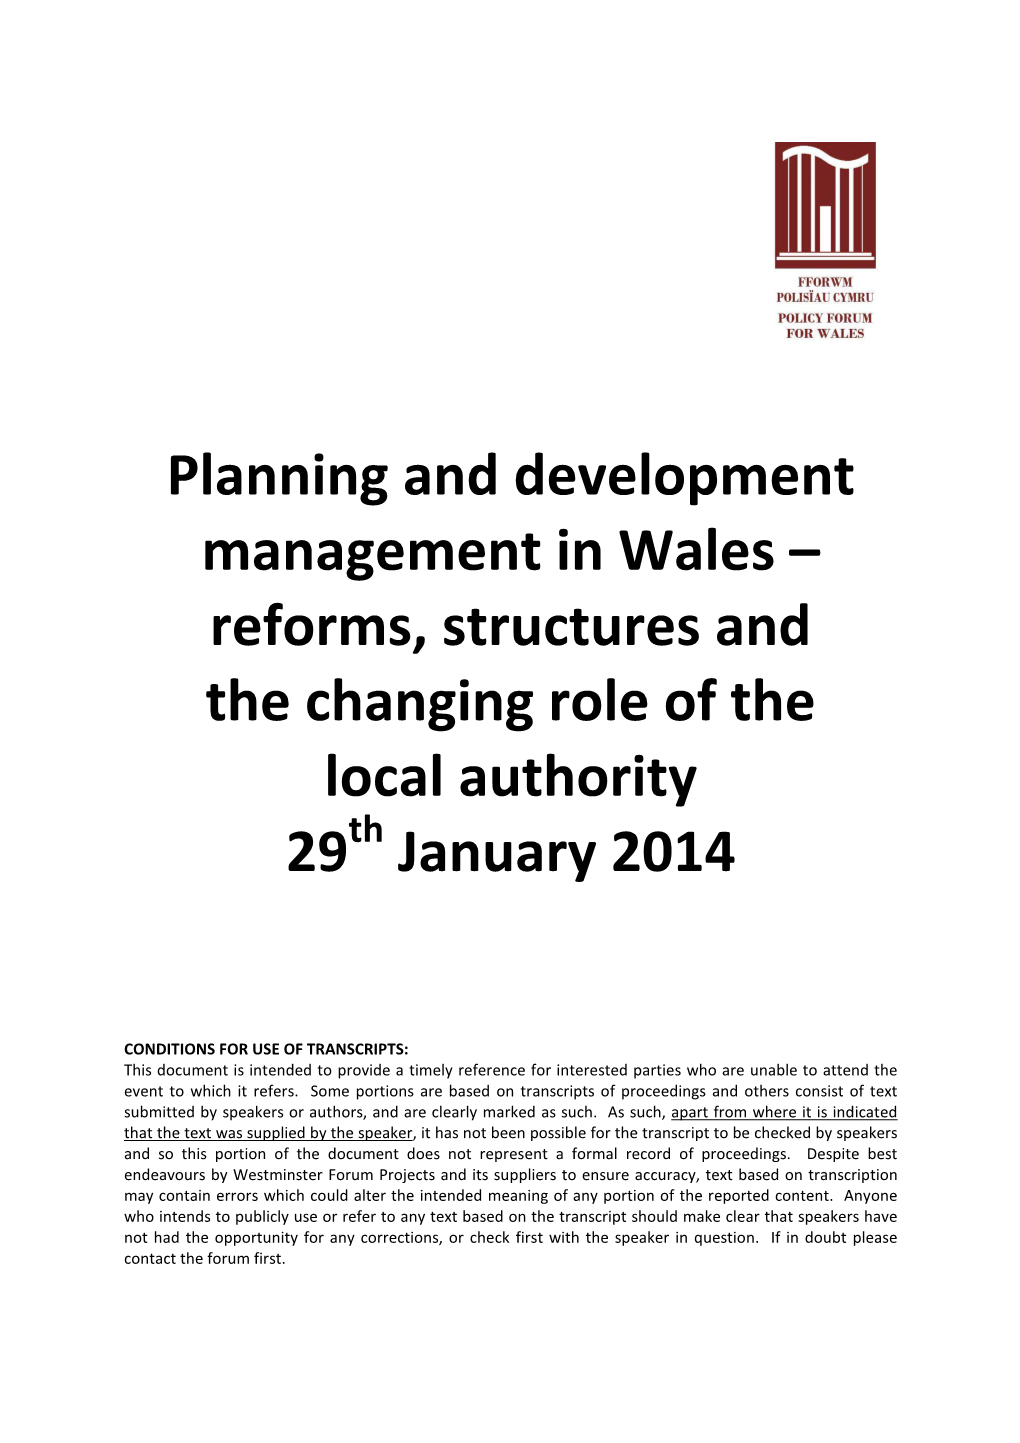 Planning and Development Management in Wales – Reforms, Structures and the Changing Role of the Local Authority 29Th January 2014